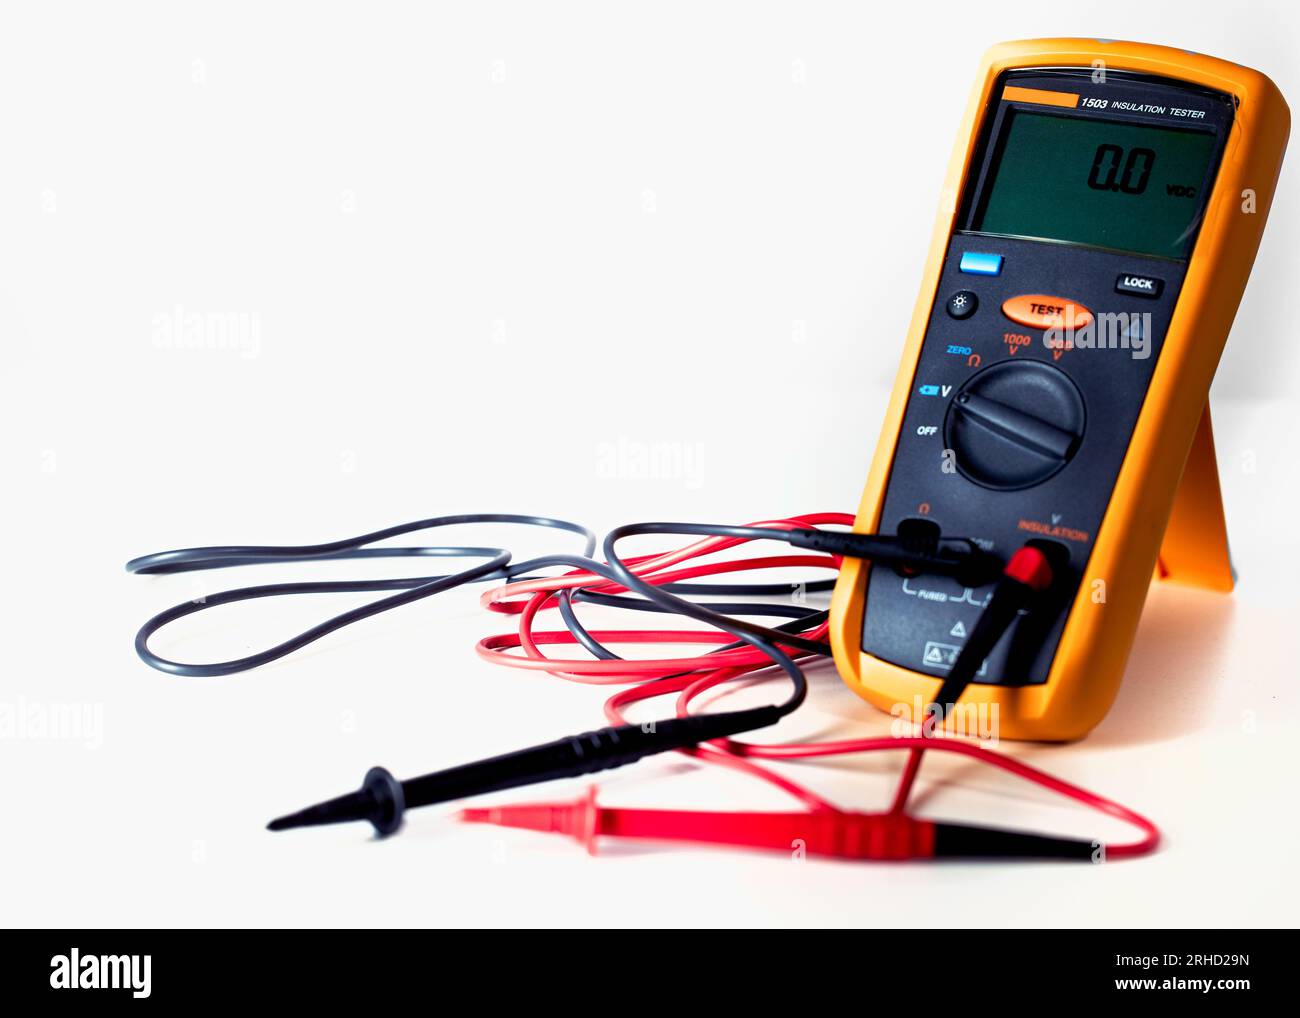 Digital multimeter with probes and green backlit display on a white background Stock Photo